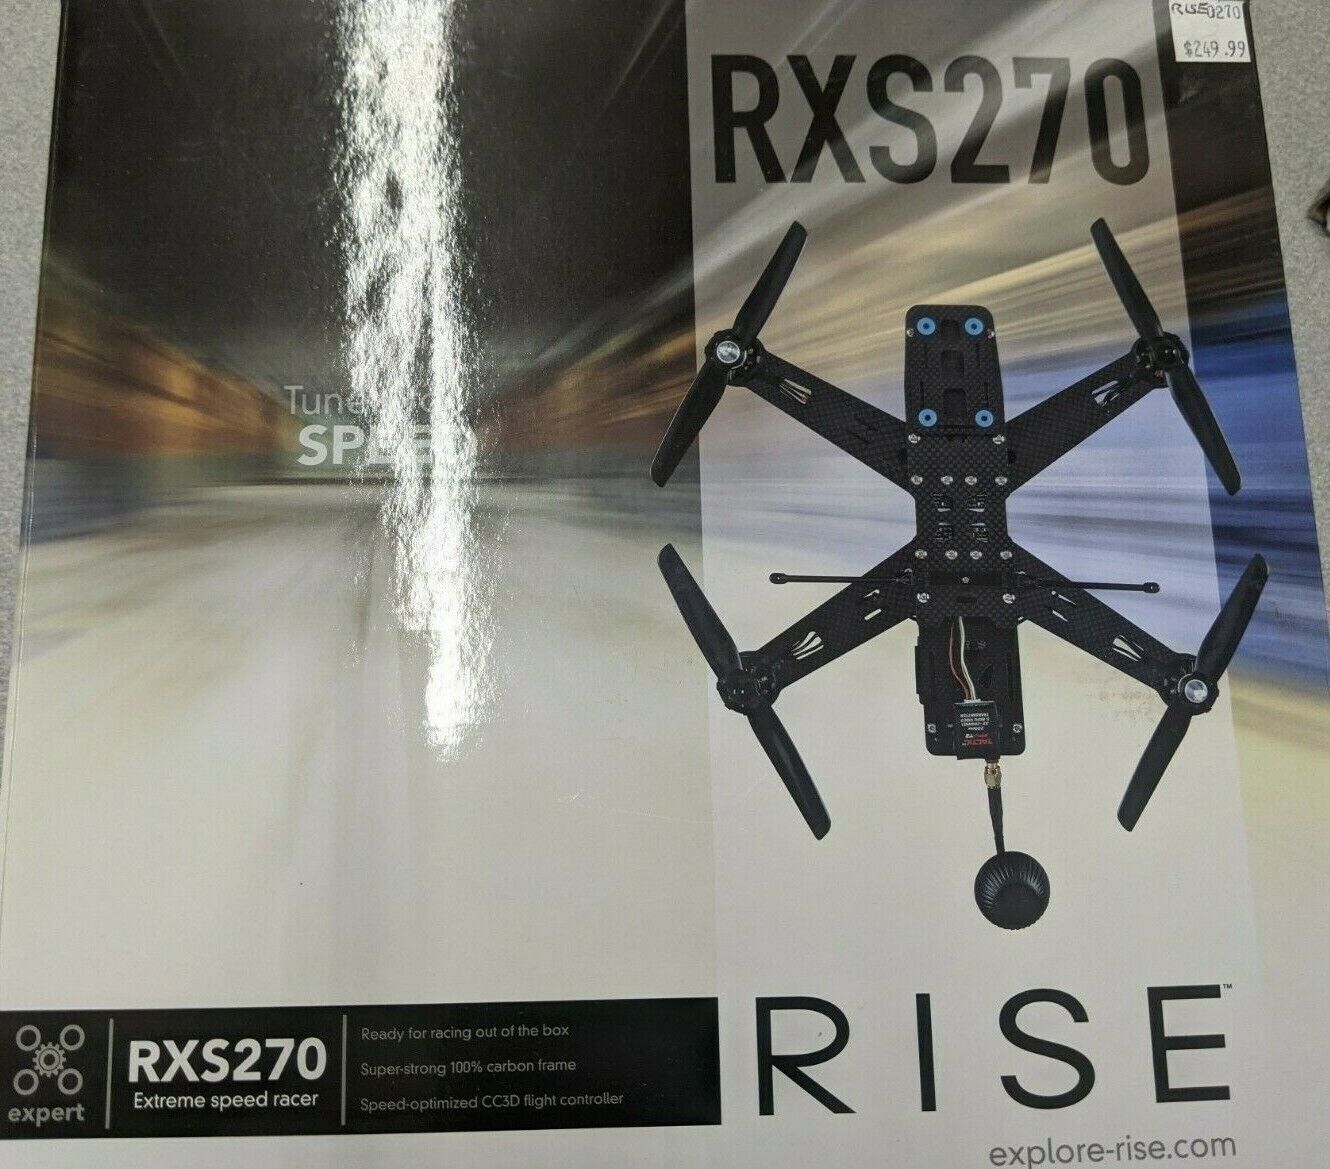 Drone RXS270 RISE extreme racer